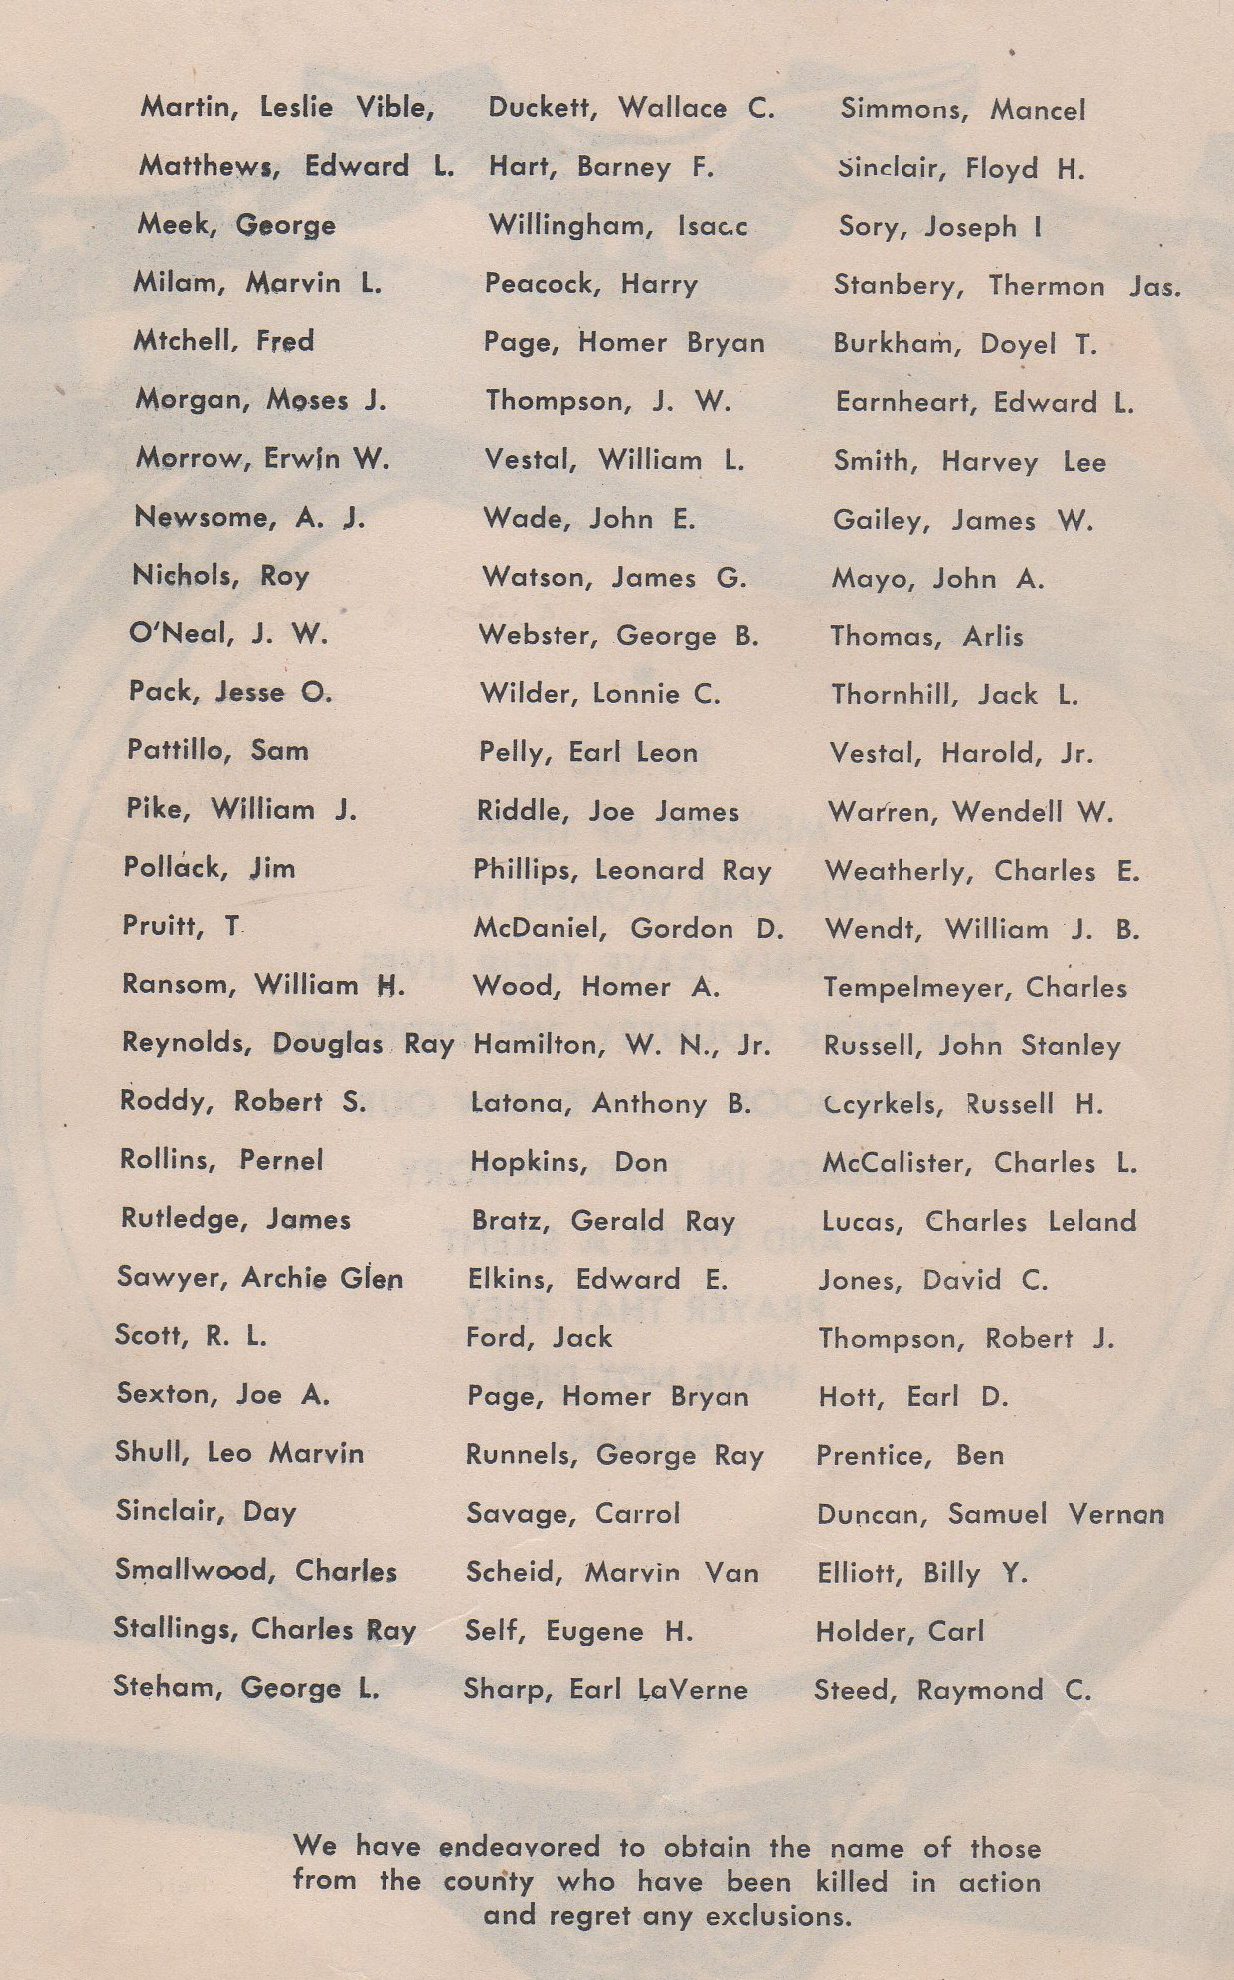 Men and women in the Armed Forces from Grayson County Texas Killed in Action